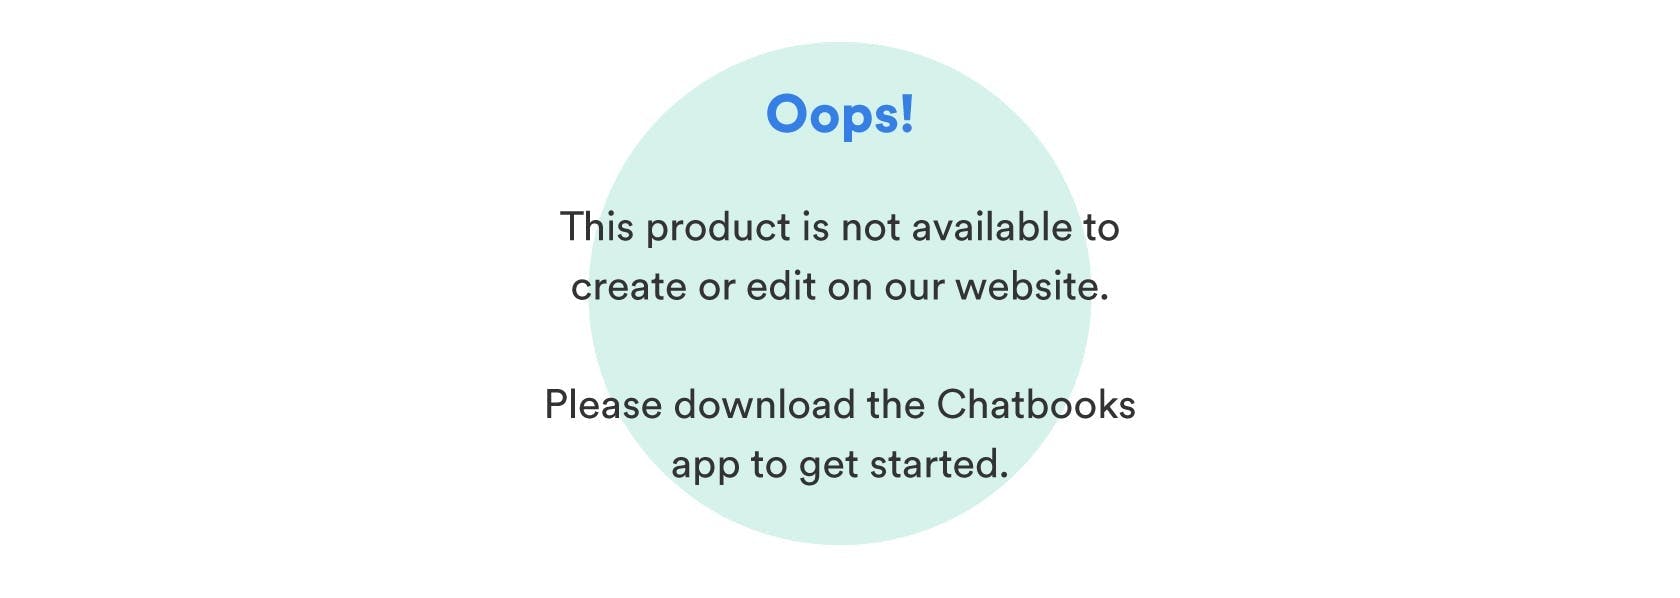 Oops! This product is not available to create or edit on our website. Please download the Chatbooks app to get started.